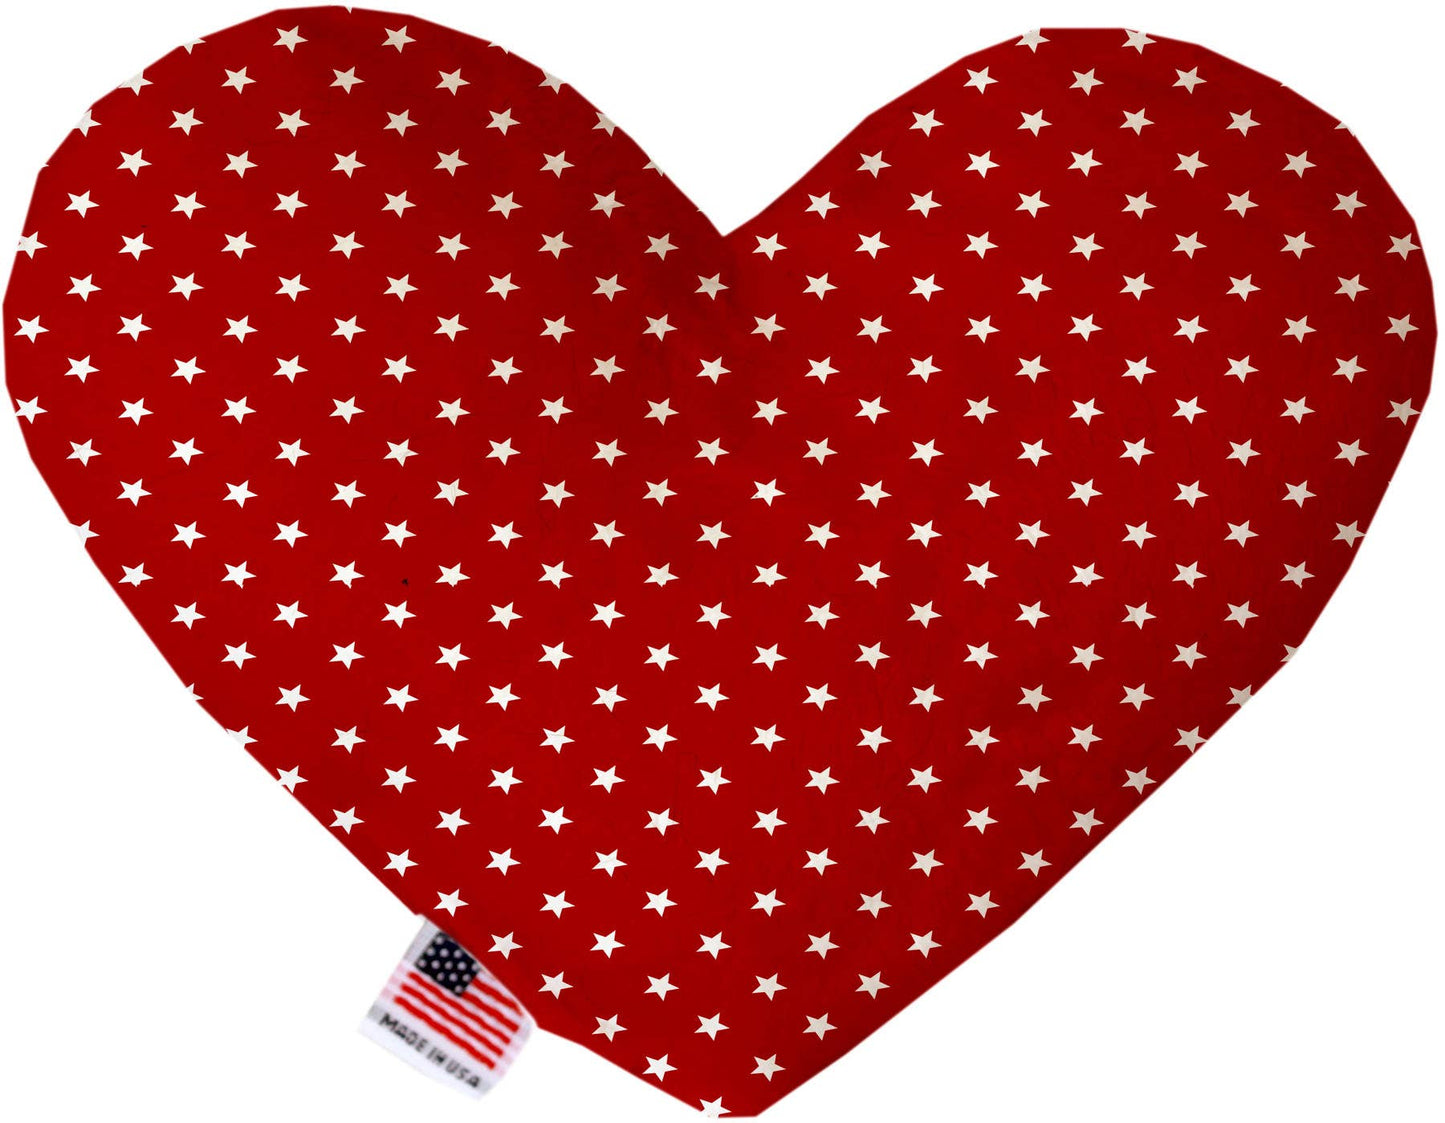 Heart Plush Red Stars Toy - 8"